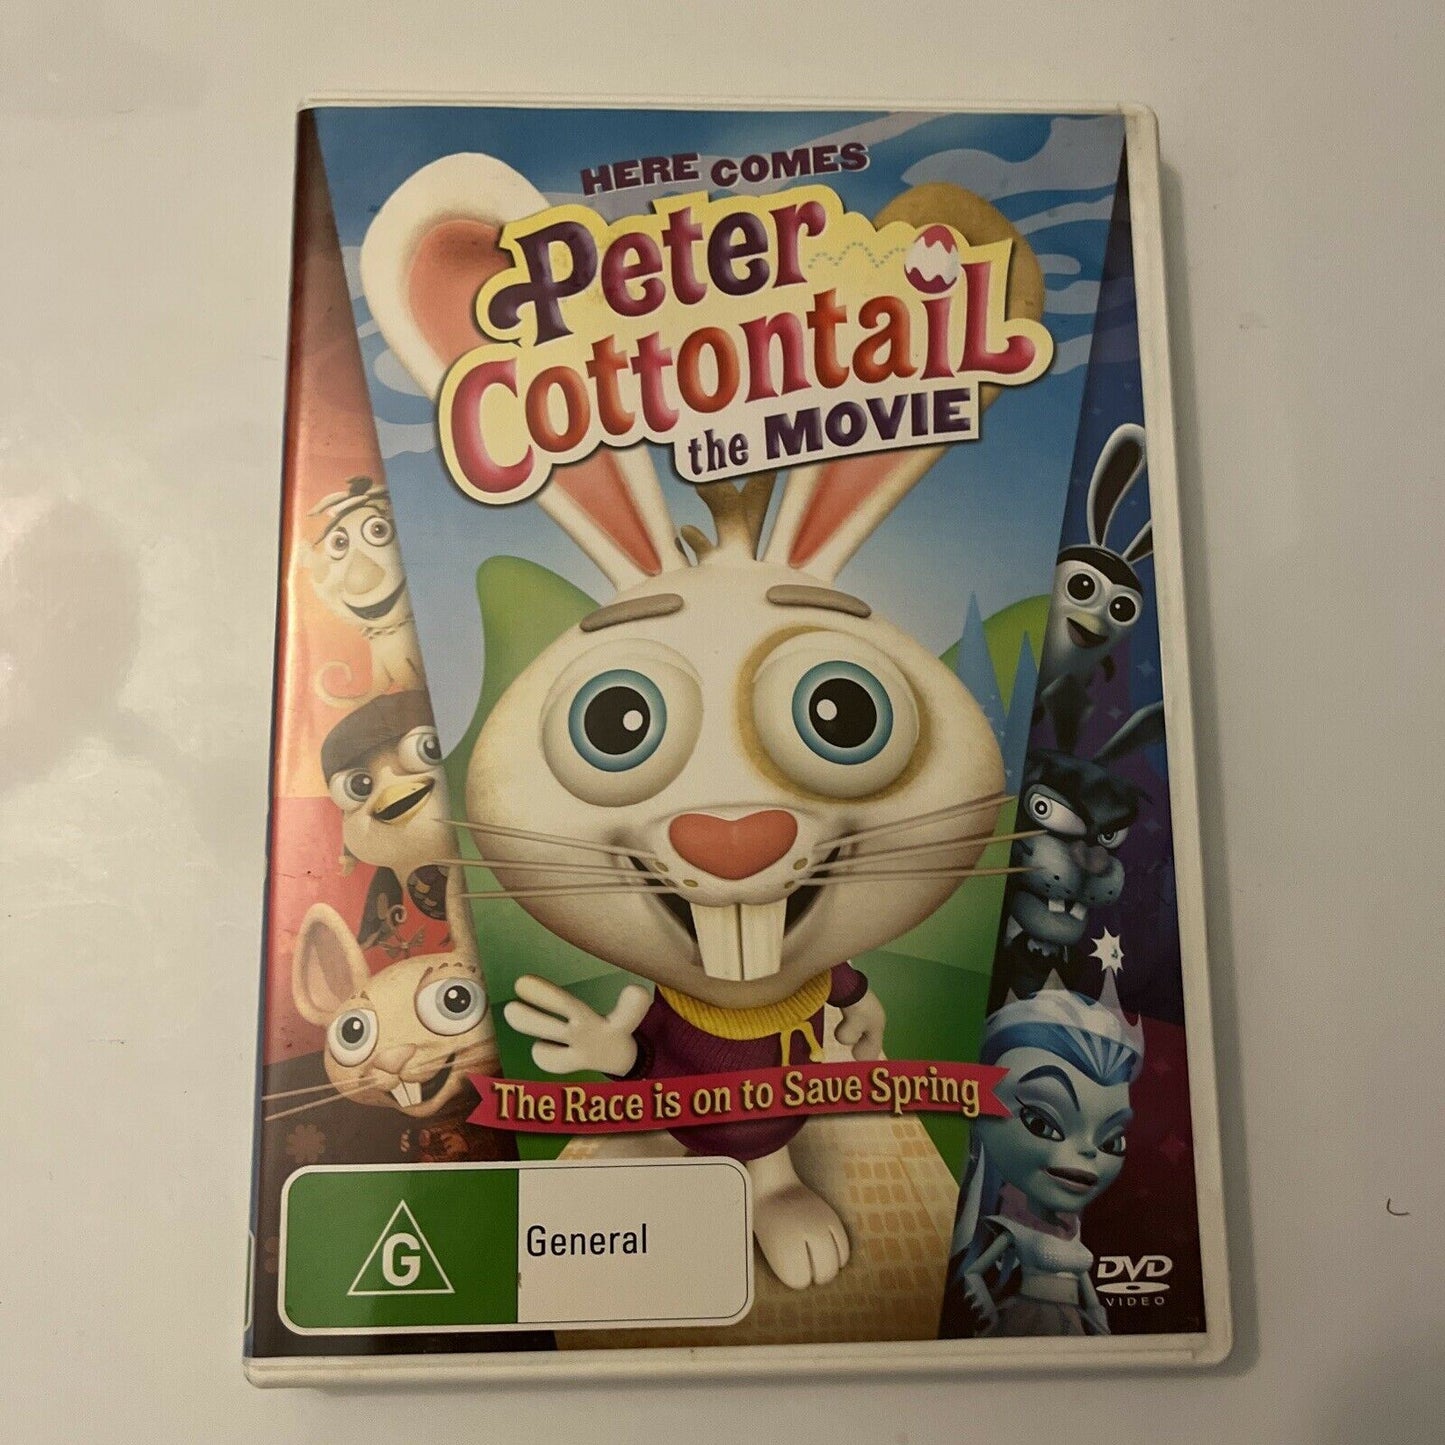 Here Comes Peter Cottontail (DVD, 2005) Region 4